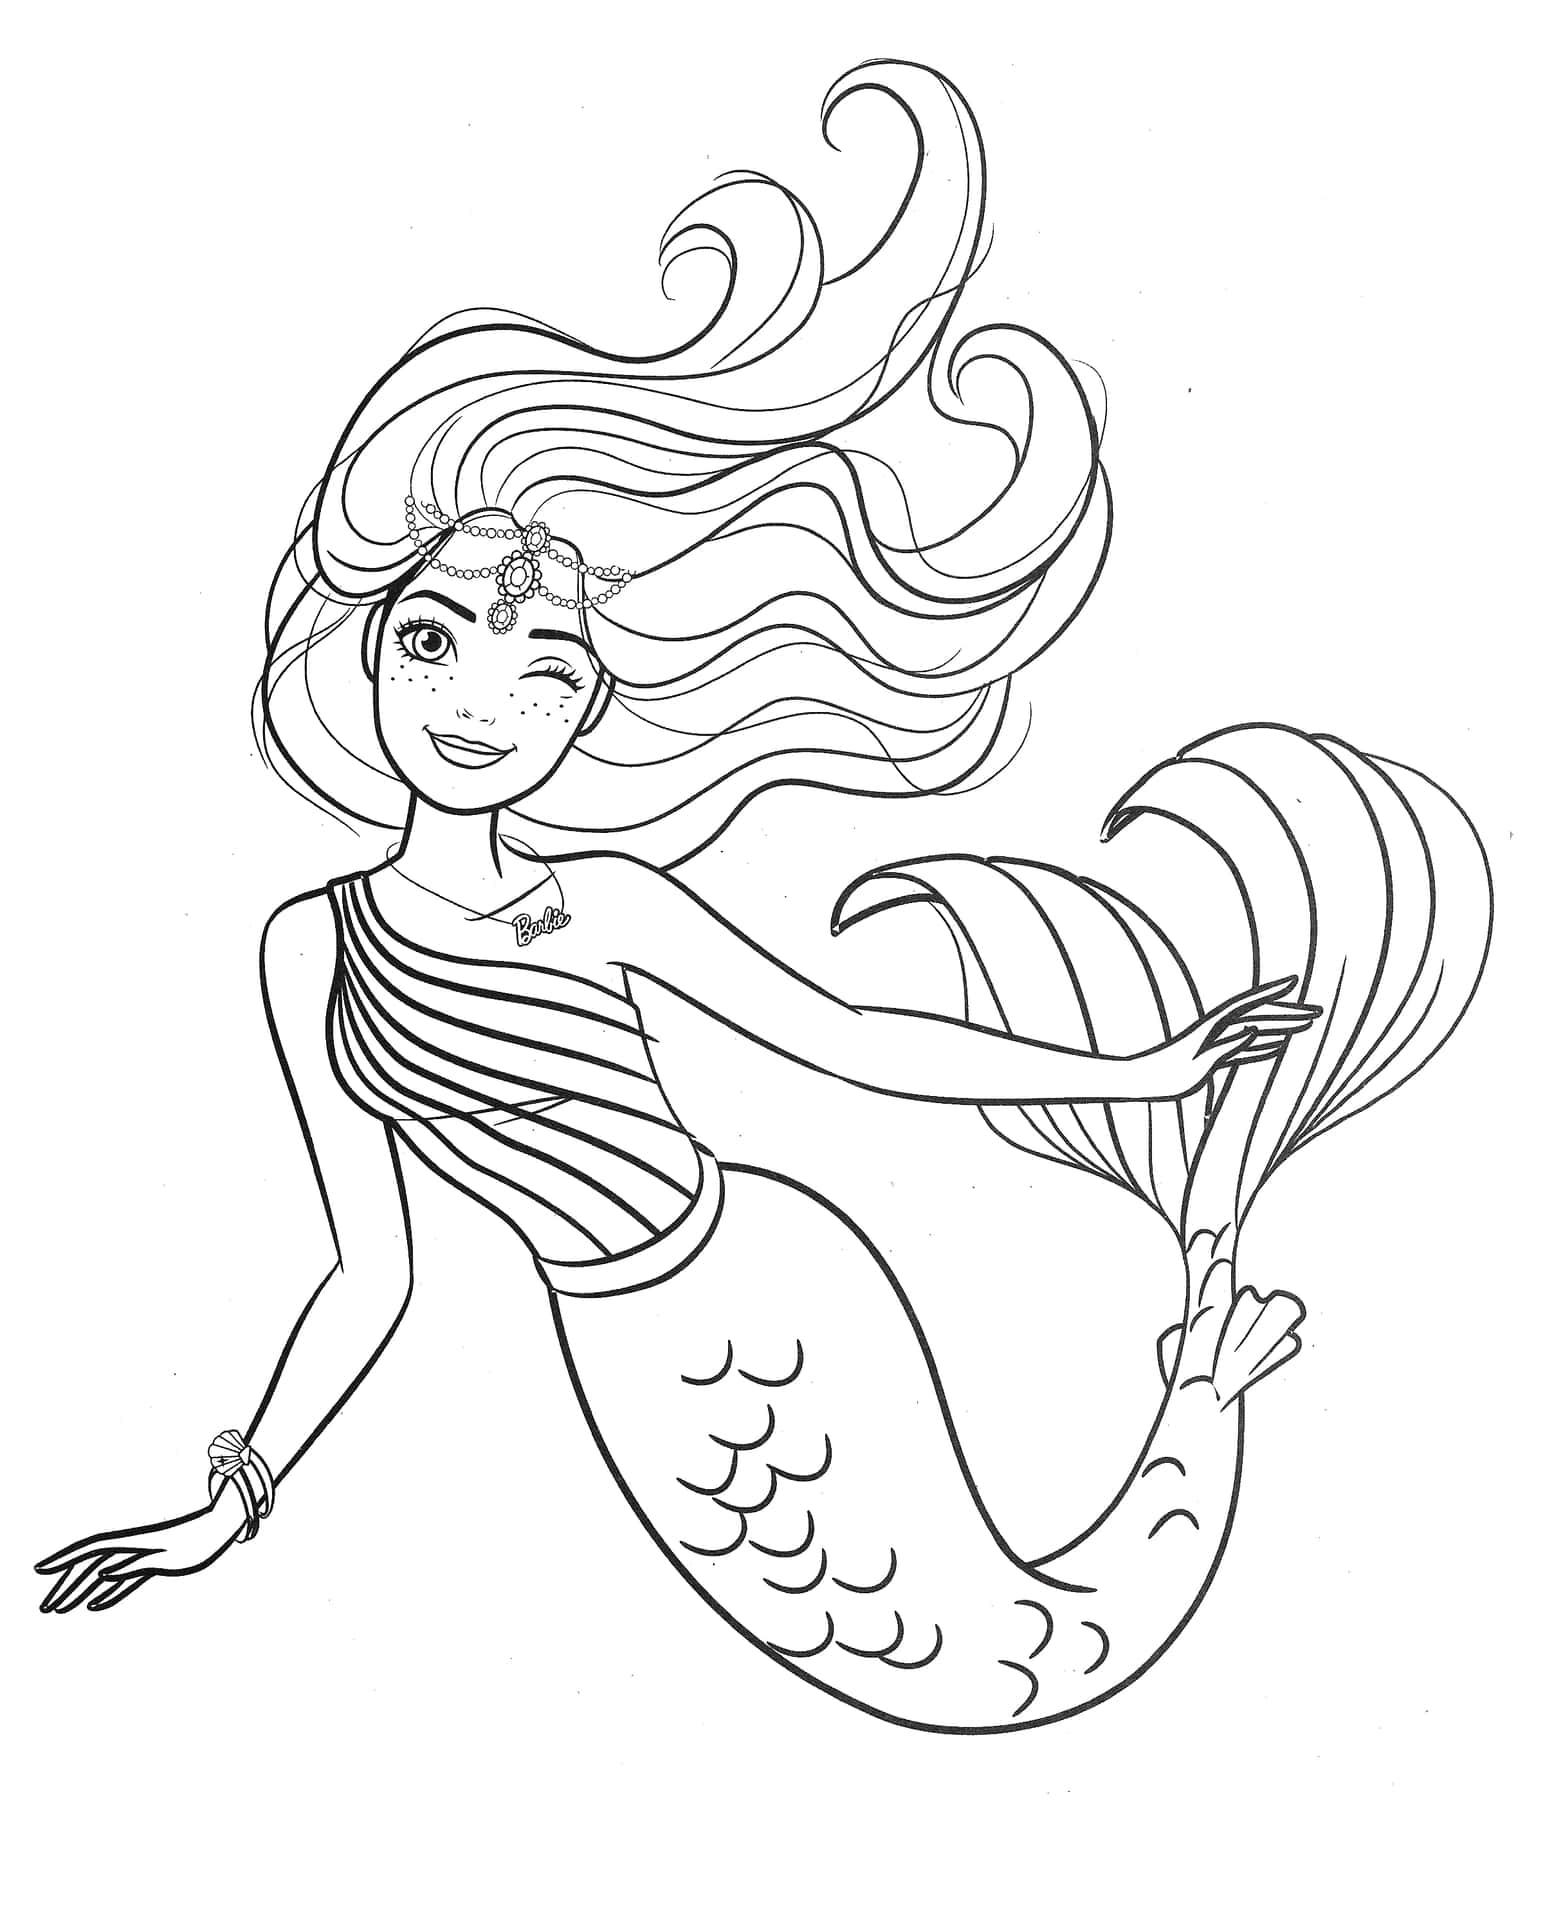 Enjoy coloring these magical mermaids!